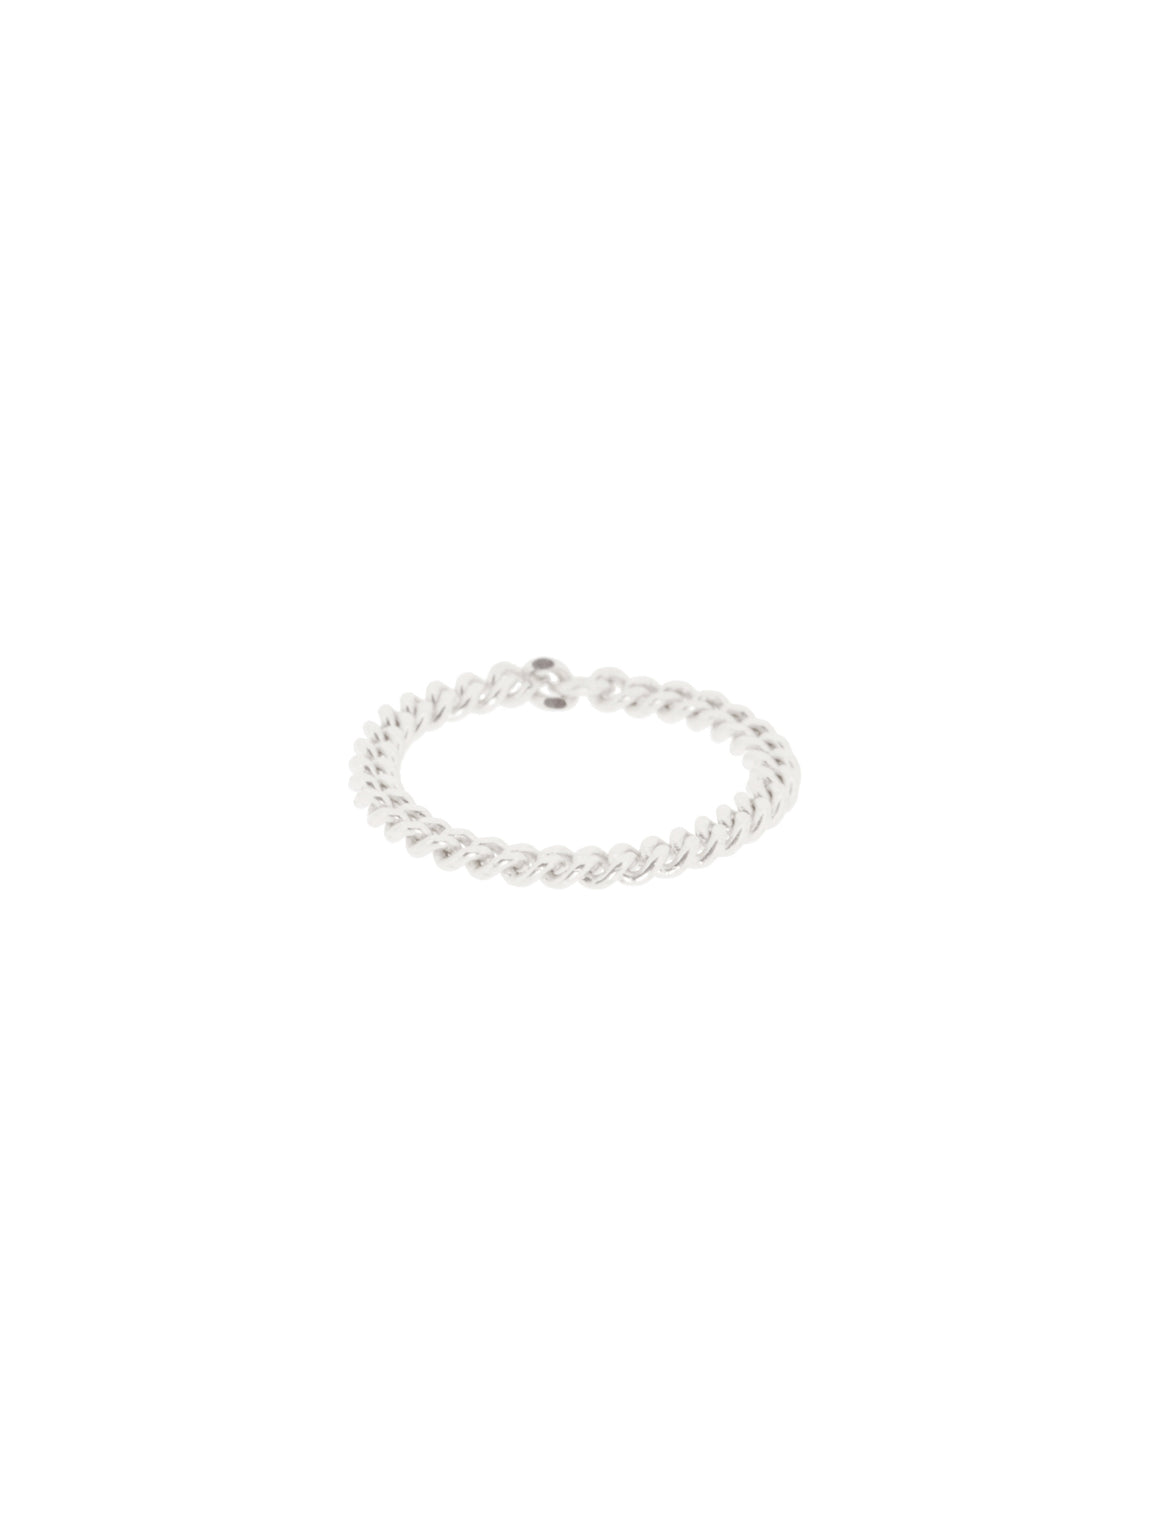 Curb chain | 925 Sterling Silver